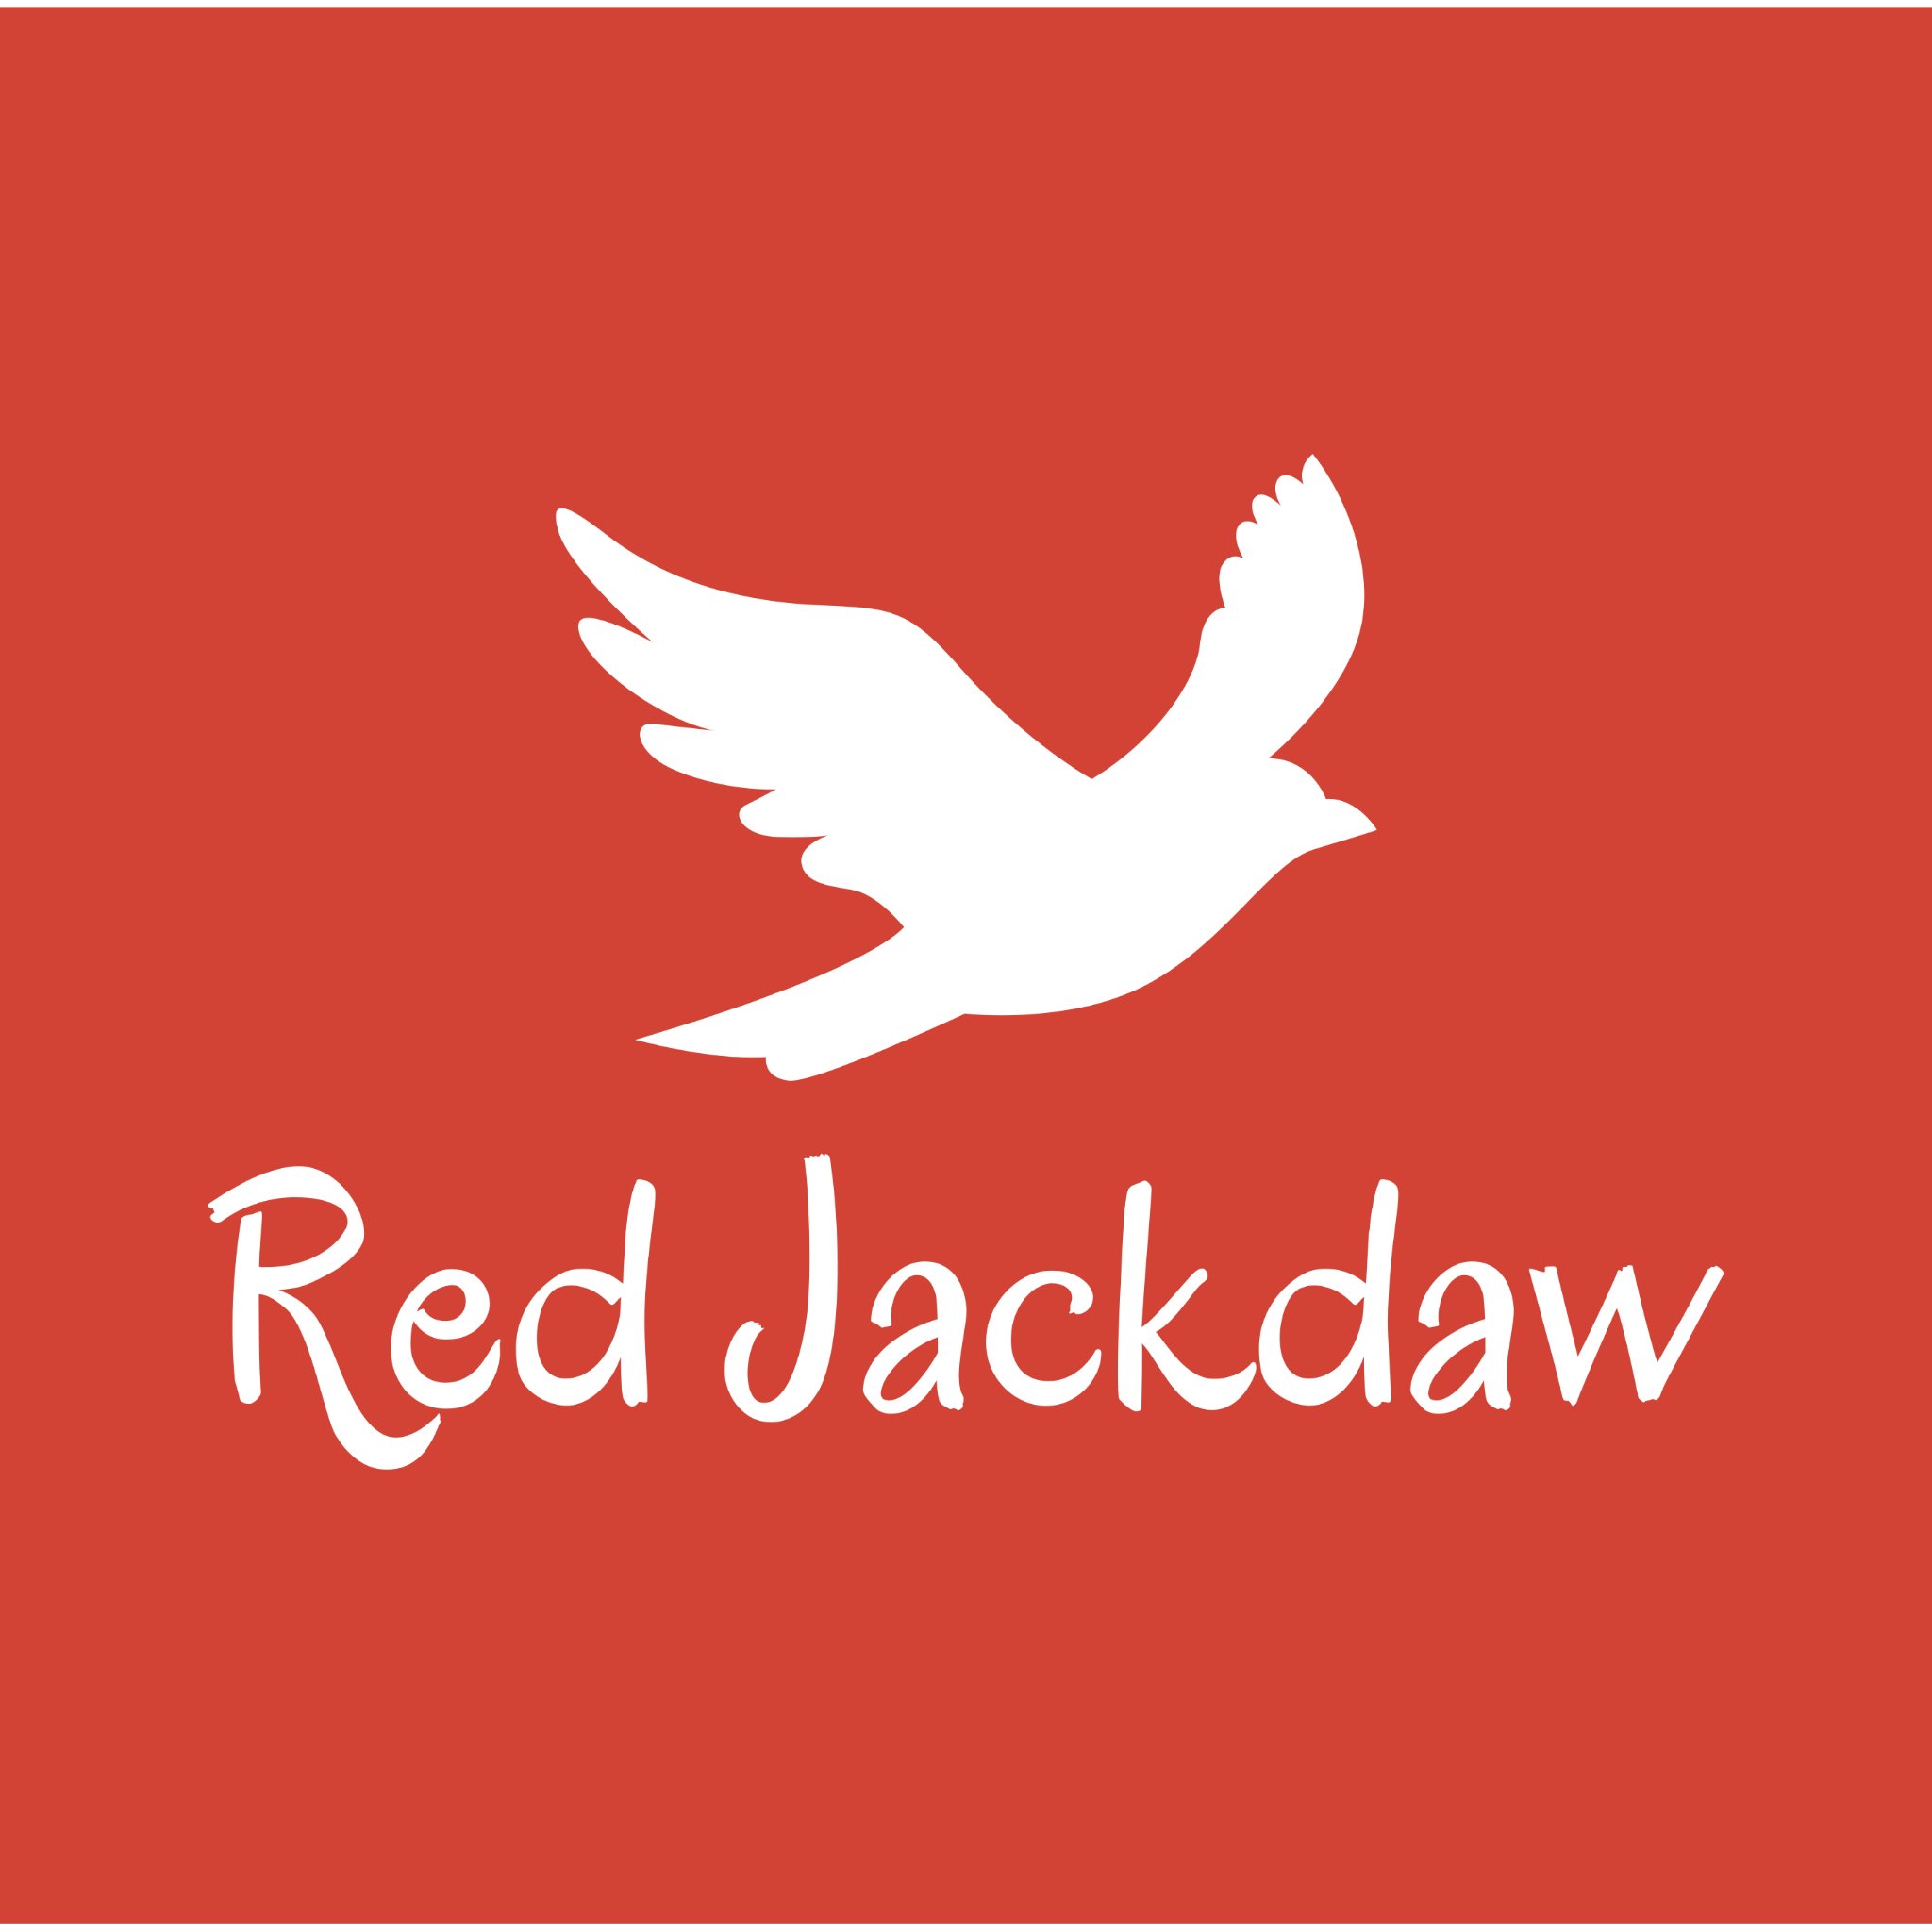 Red Jackdaw